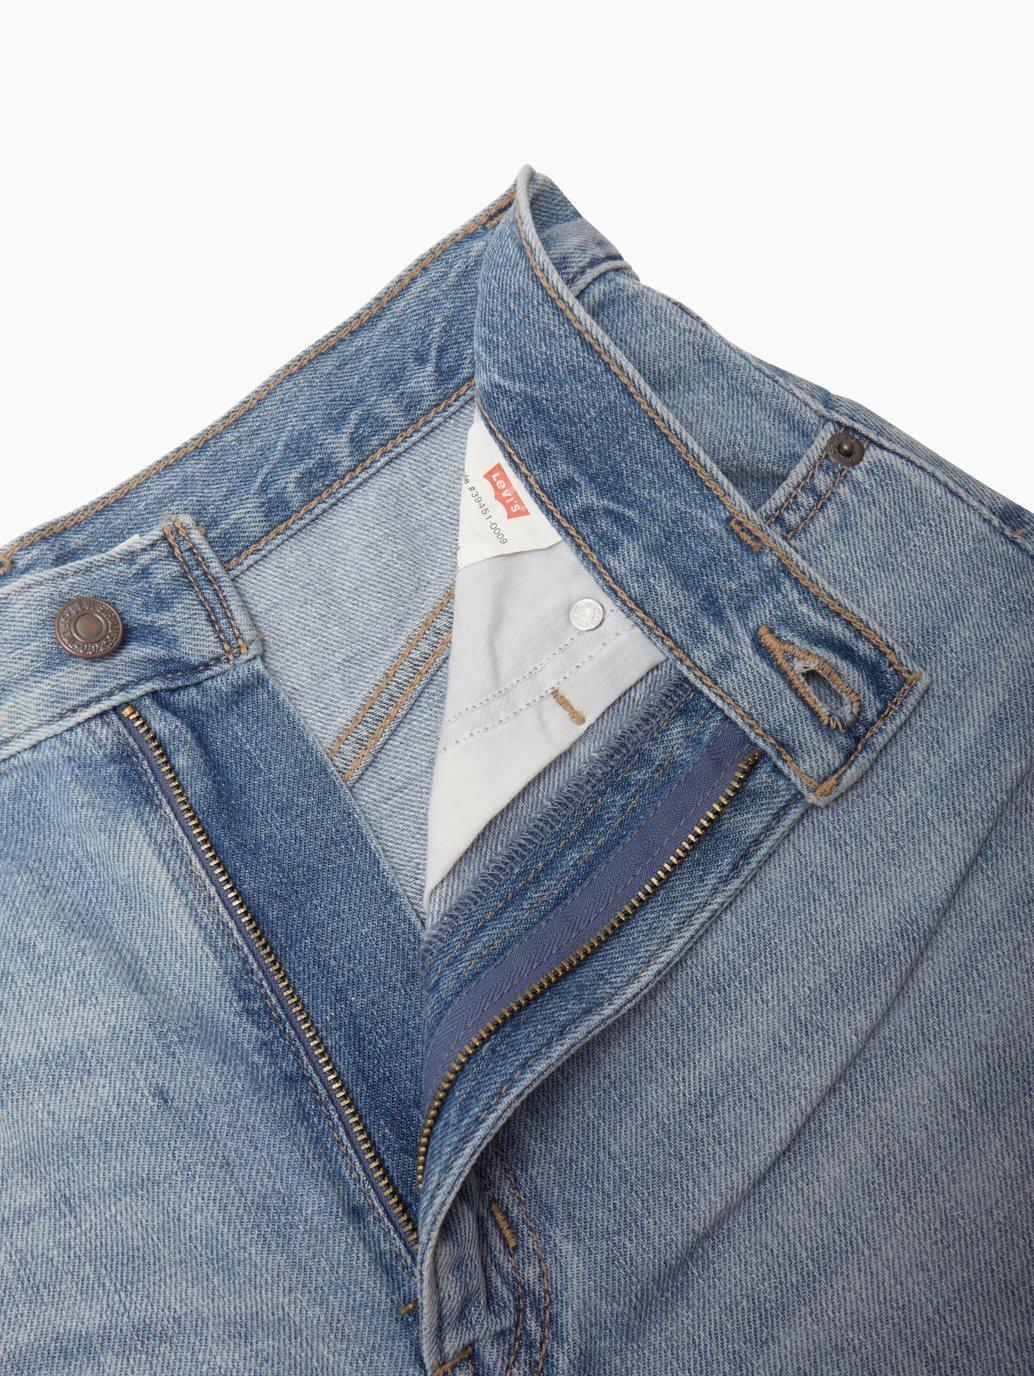 levis malaysia womens high loose shorts 394510009 17 Details